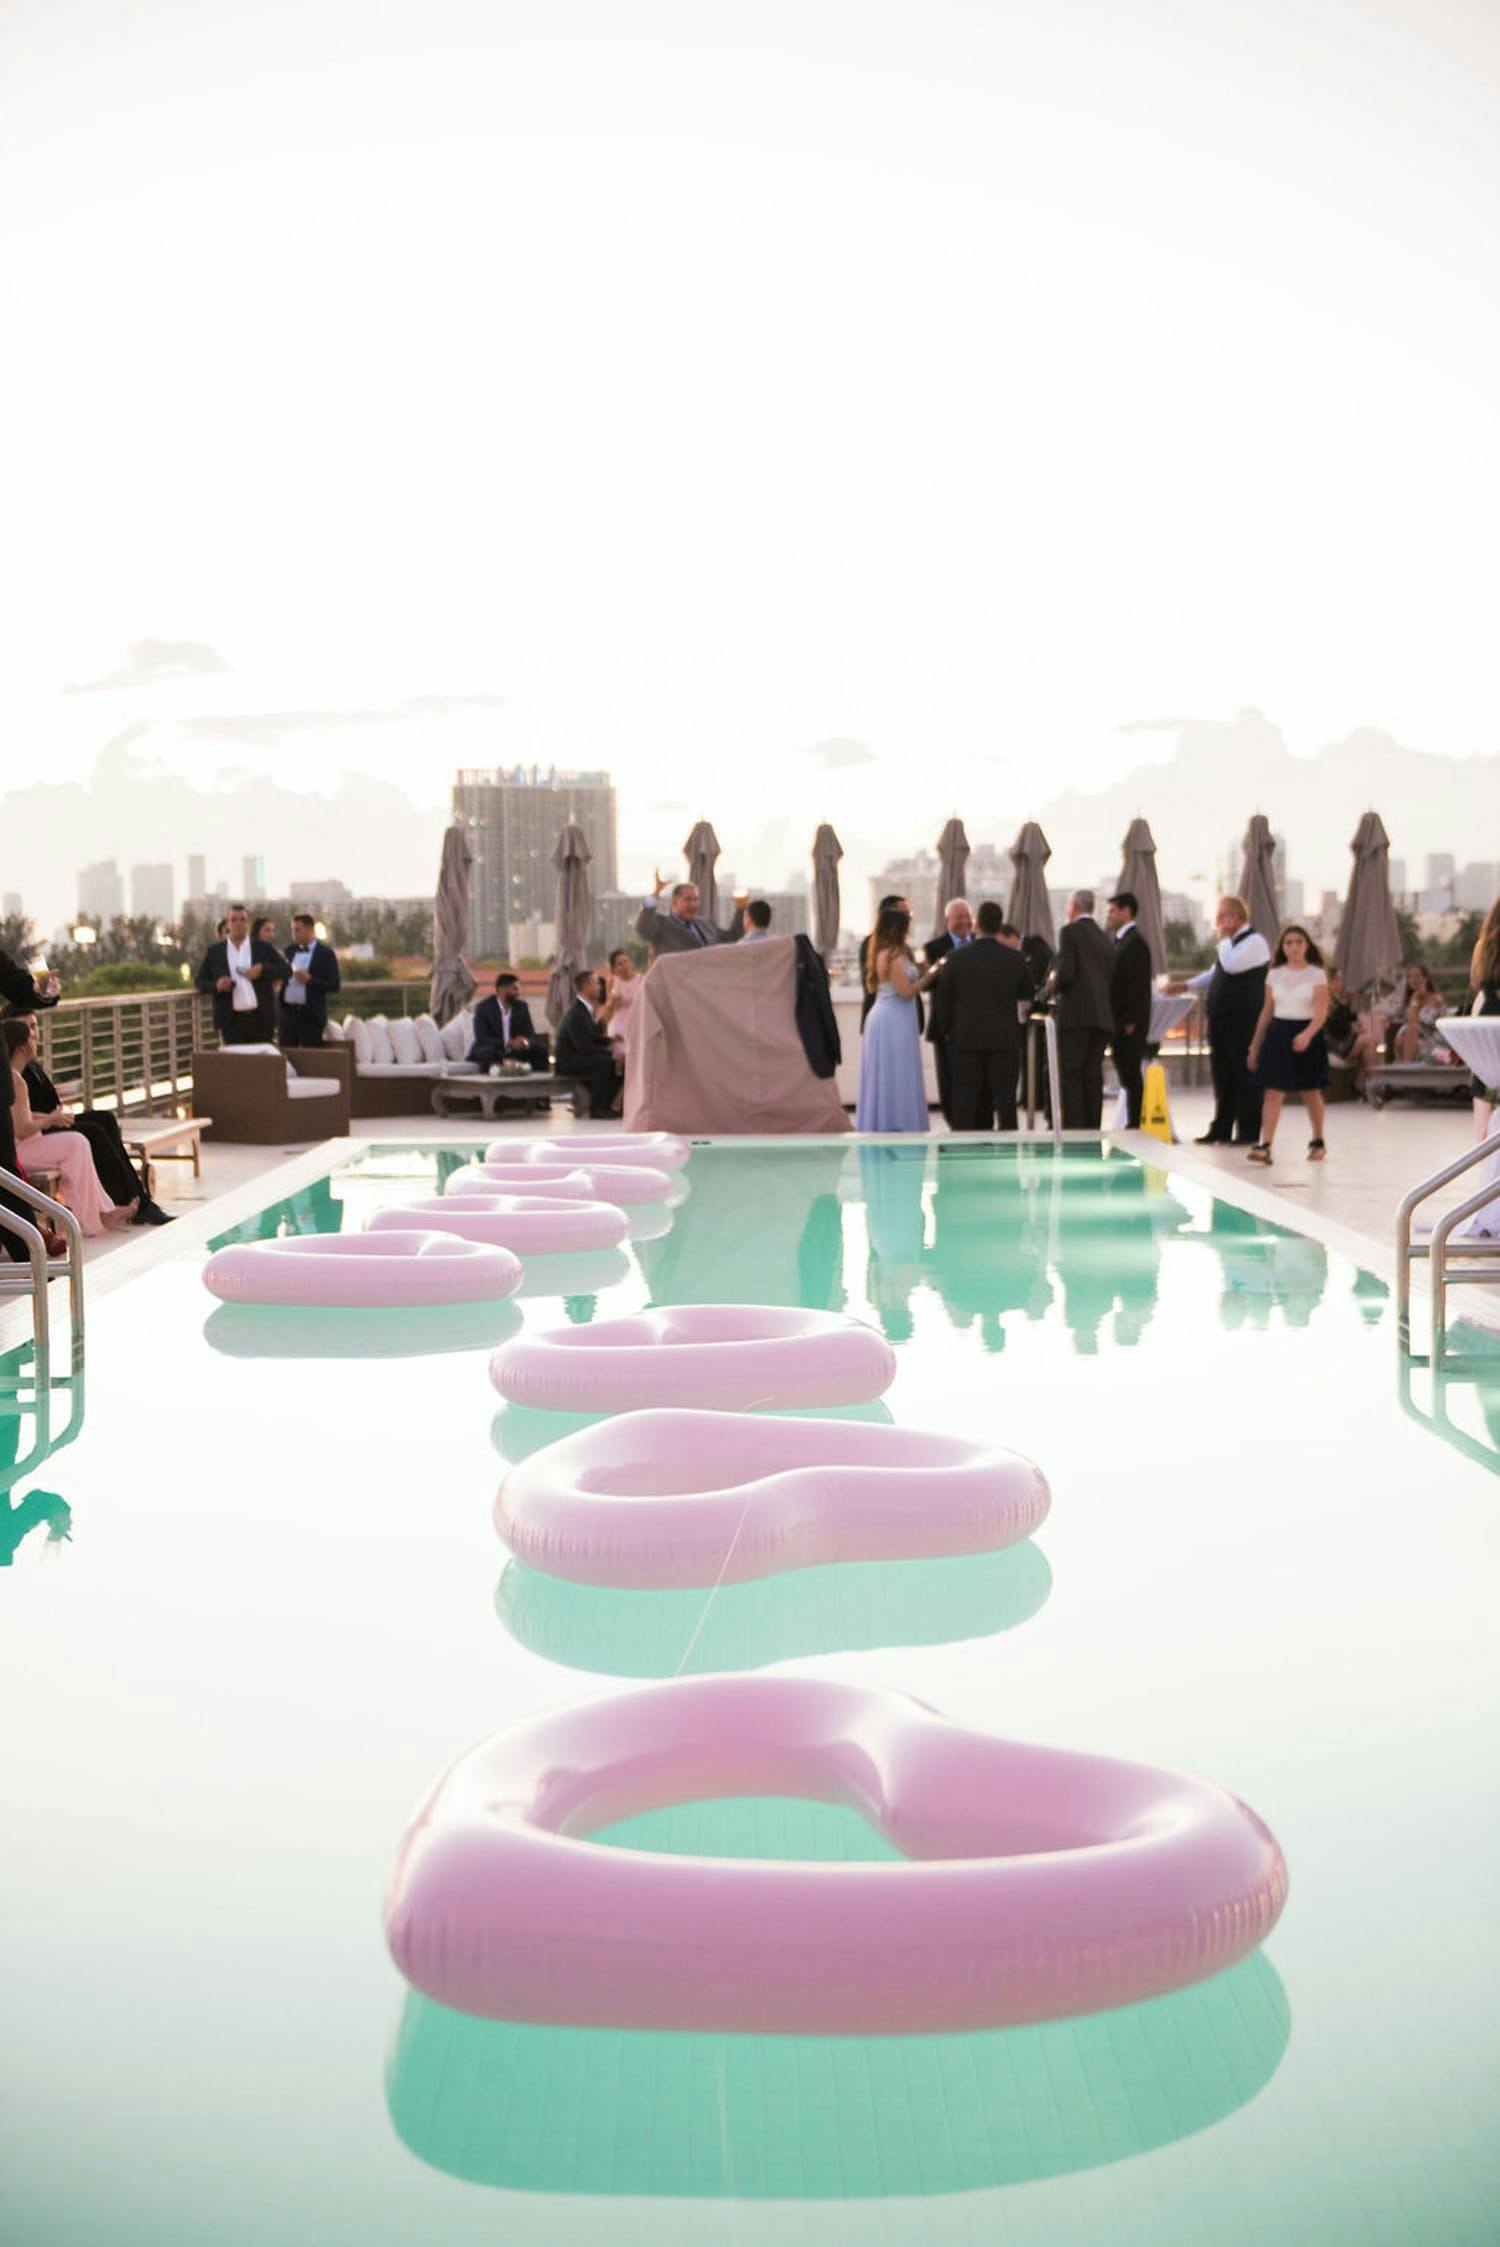 Rooftop wedding with pink heart-shaped pool inflatables | PartySlate